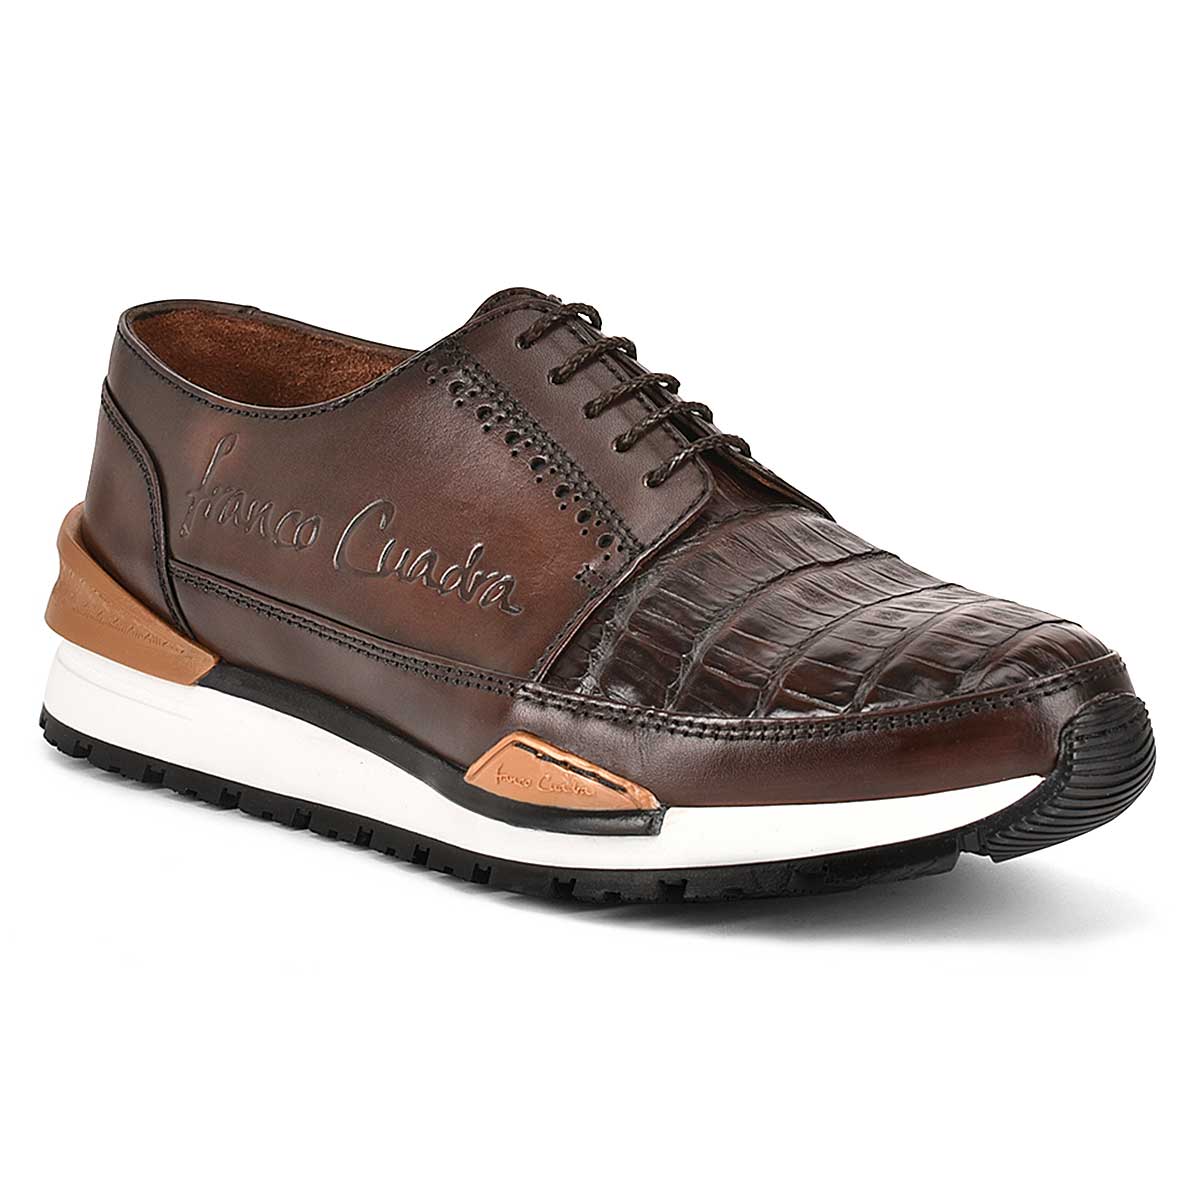 brown exotic leather sneakers, Hand-painted - 127CWTS - Cuadra Shop